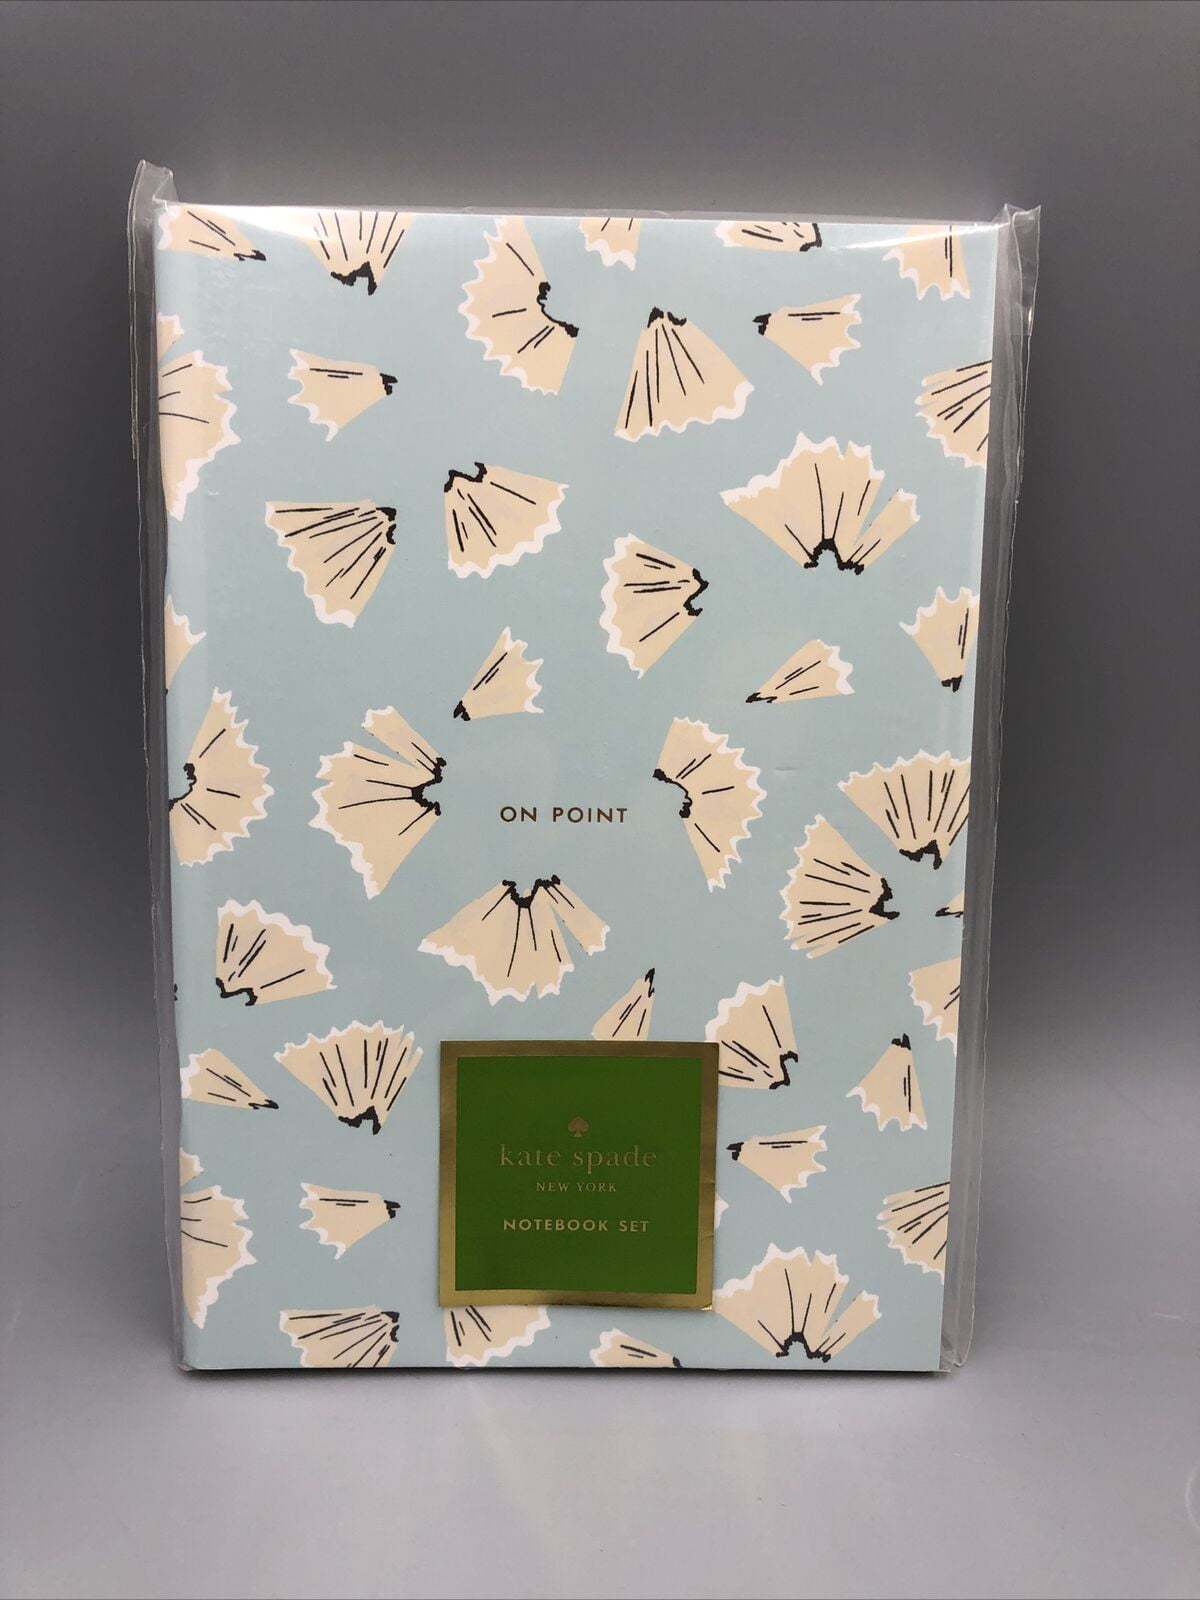 Kate Spade New York Soft Cover Triple Notebook Set 3-Pack Lined Travel  Journal 